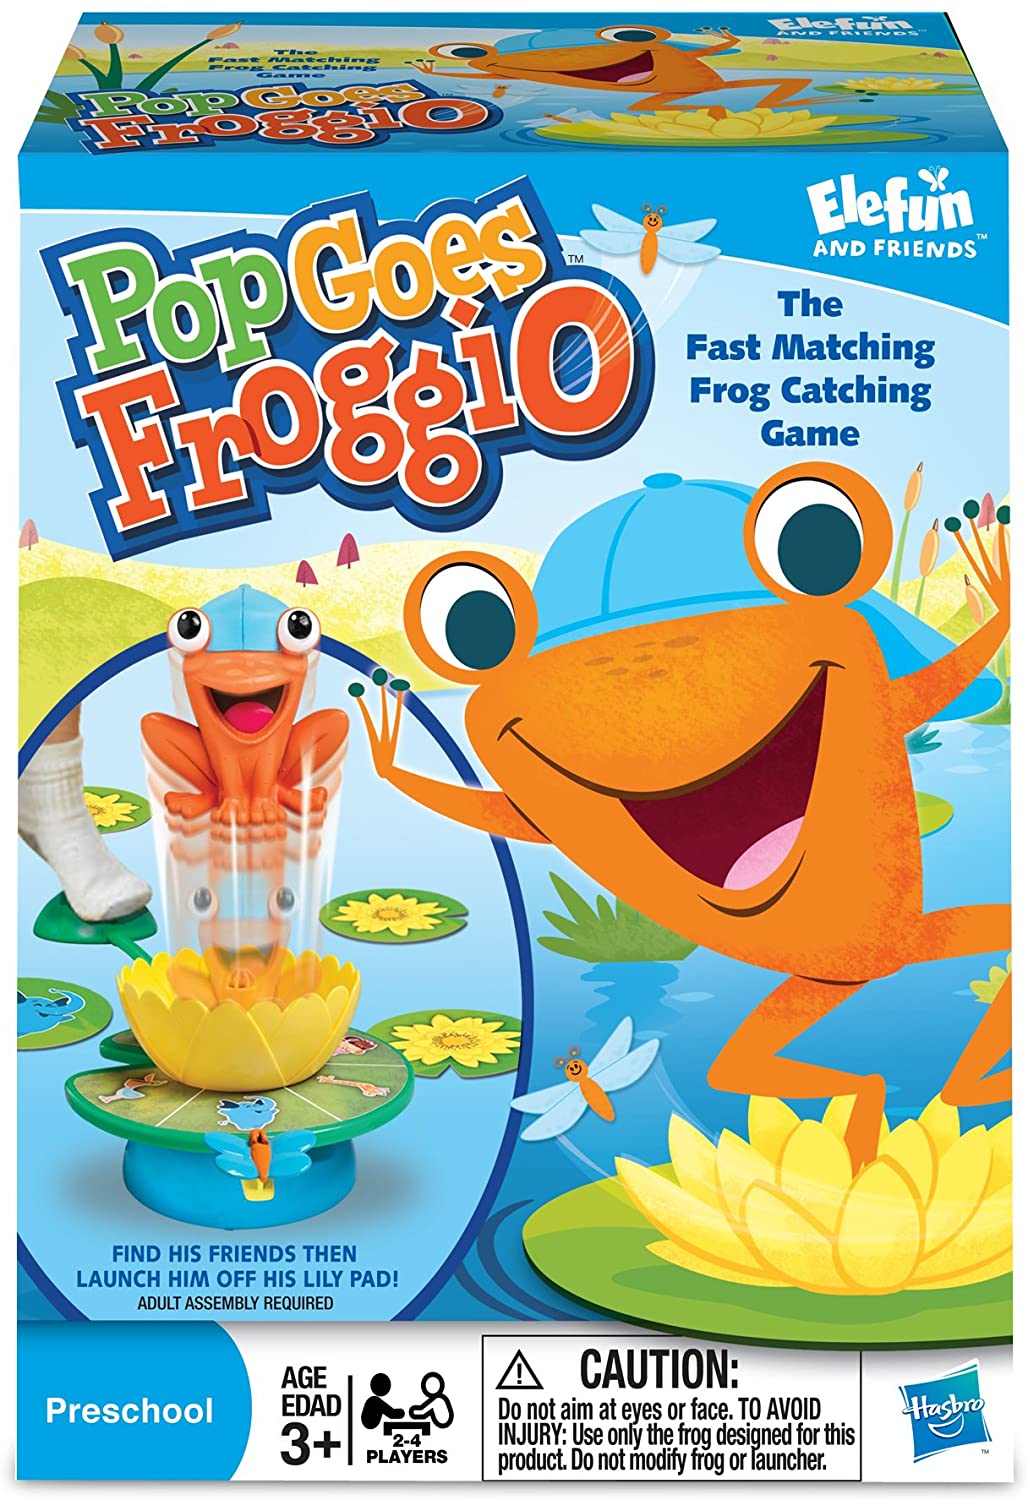 7 Best Frog Jump Game Ideas For Kids Reviews in 2023 1